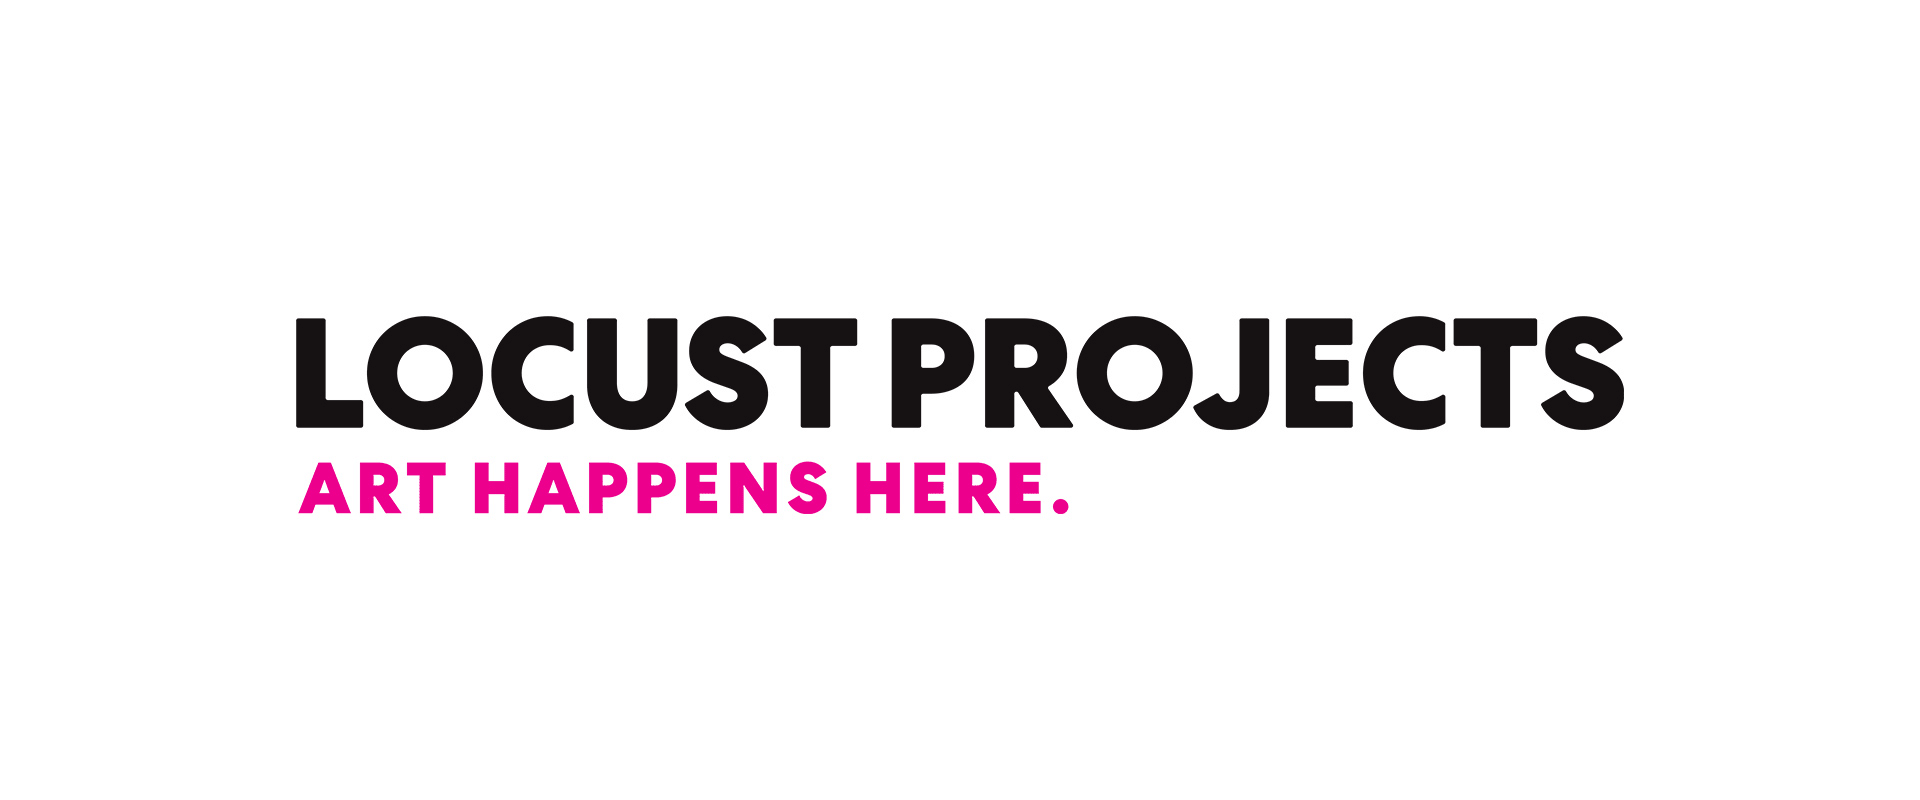 Logo brand for Locust Projects